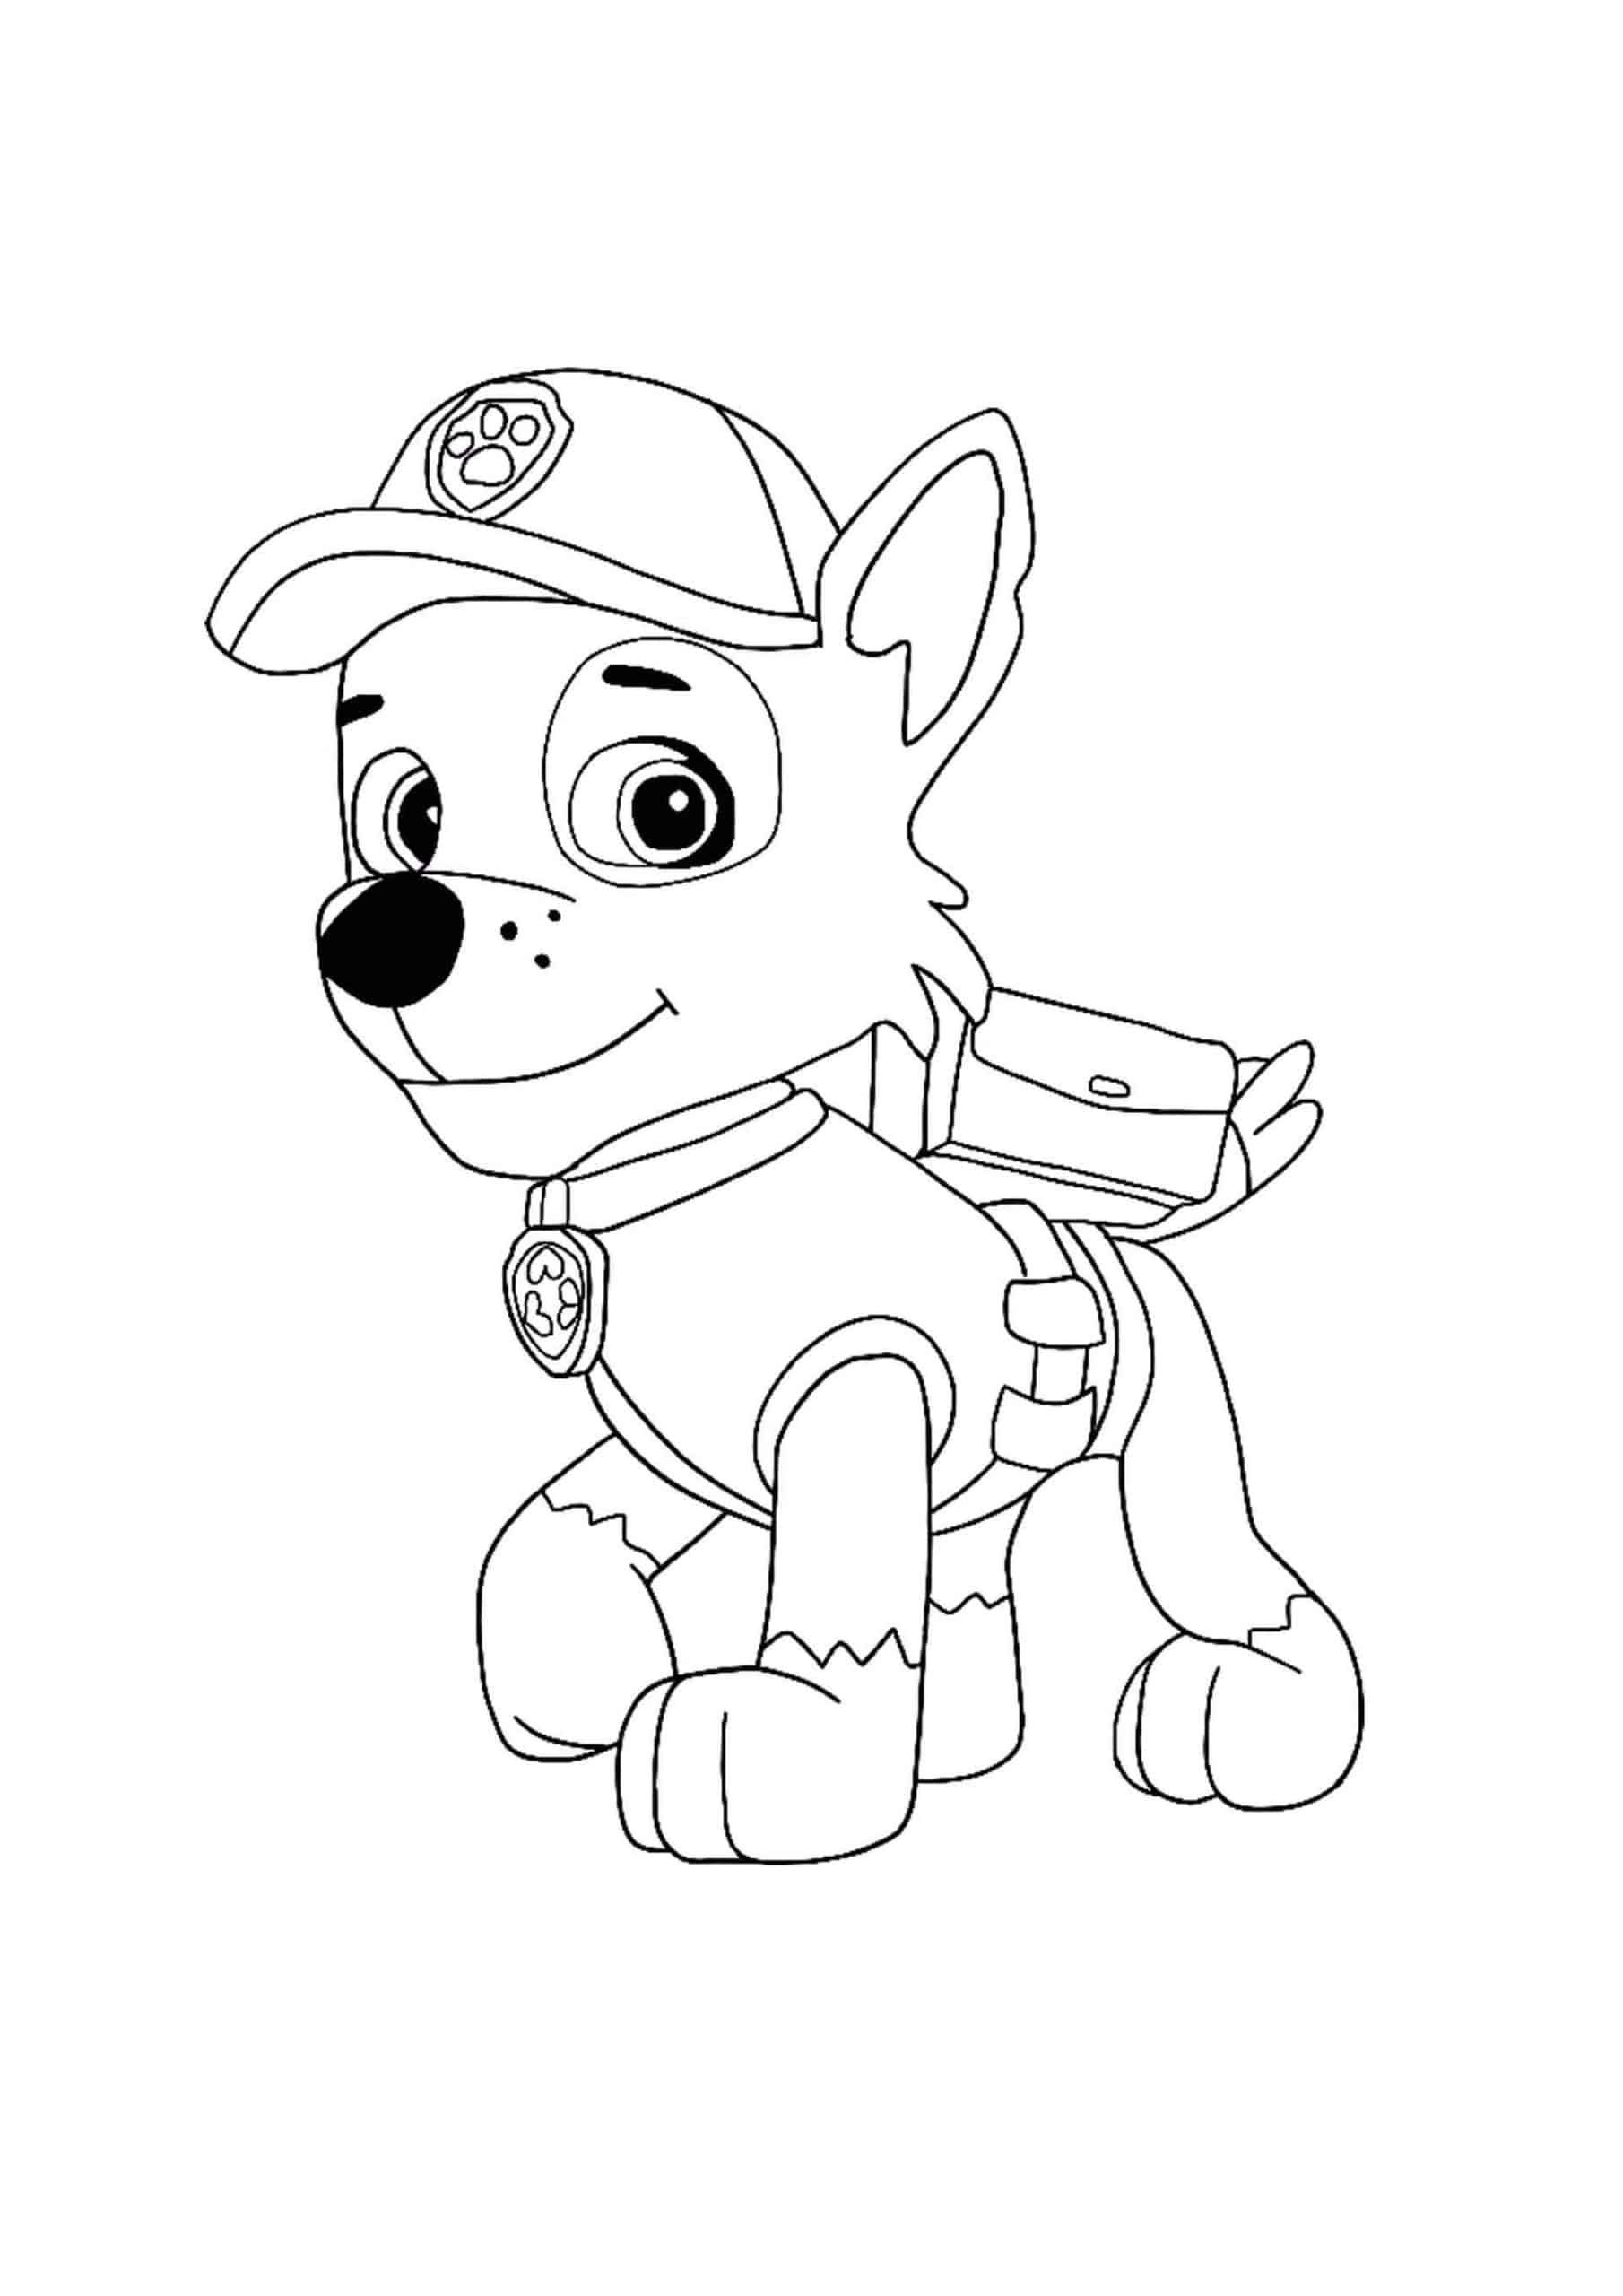 Paw Patrol Coloring Pages FREE Printable 79